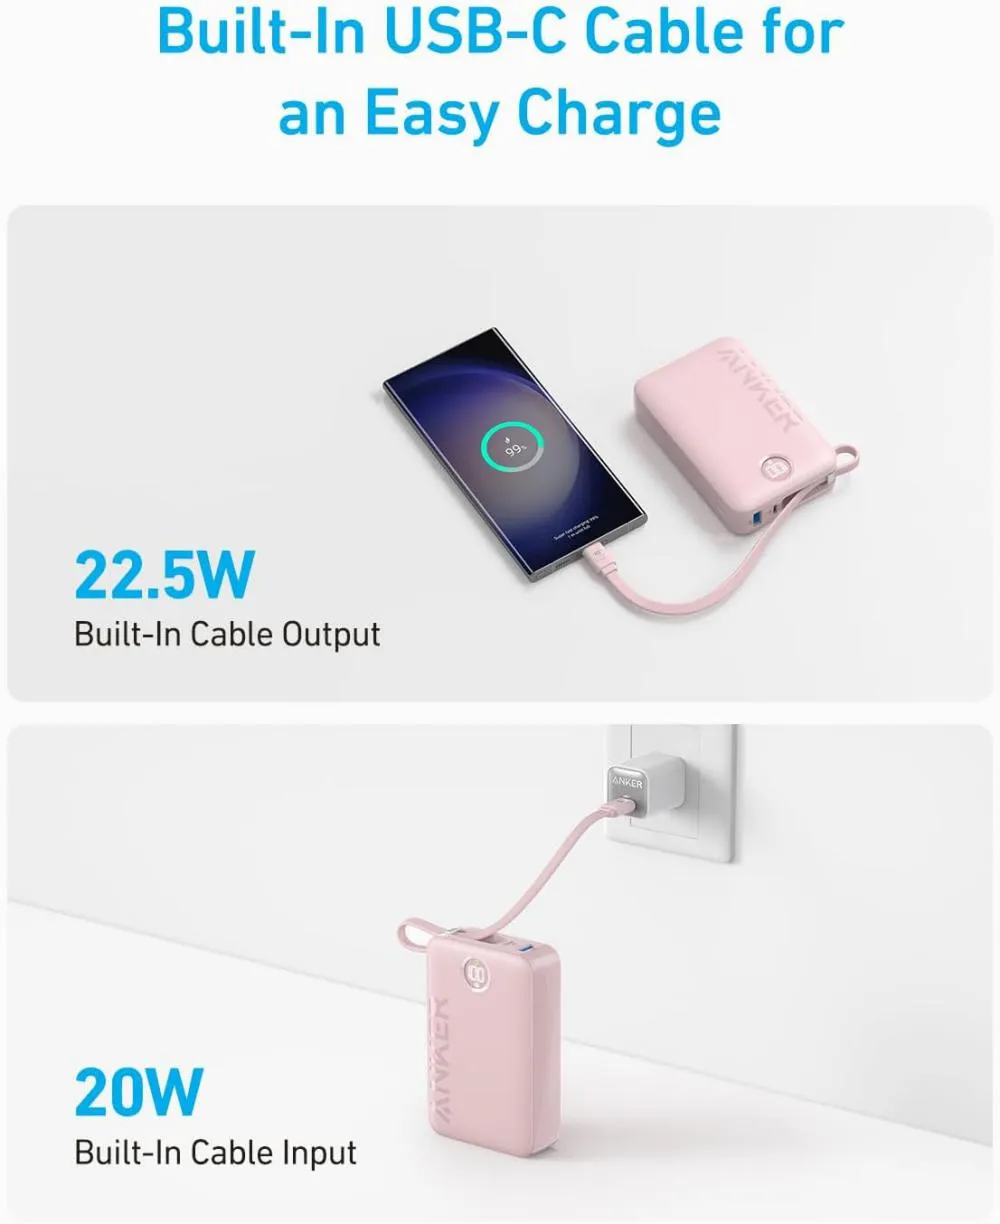 Anker A1647 Power Bank 20000mAh 22.5W Built In USB C Cable